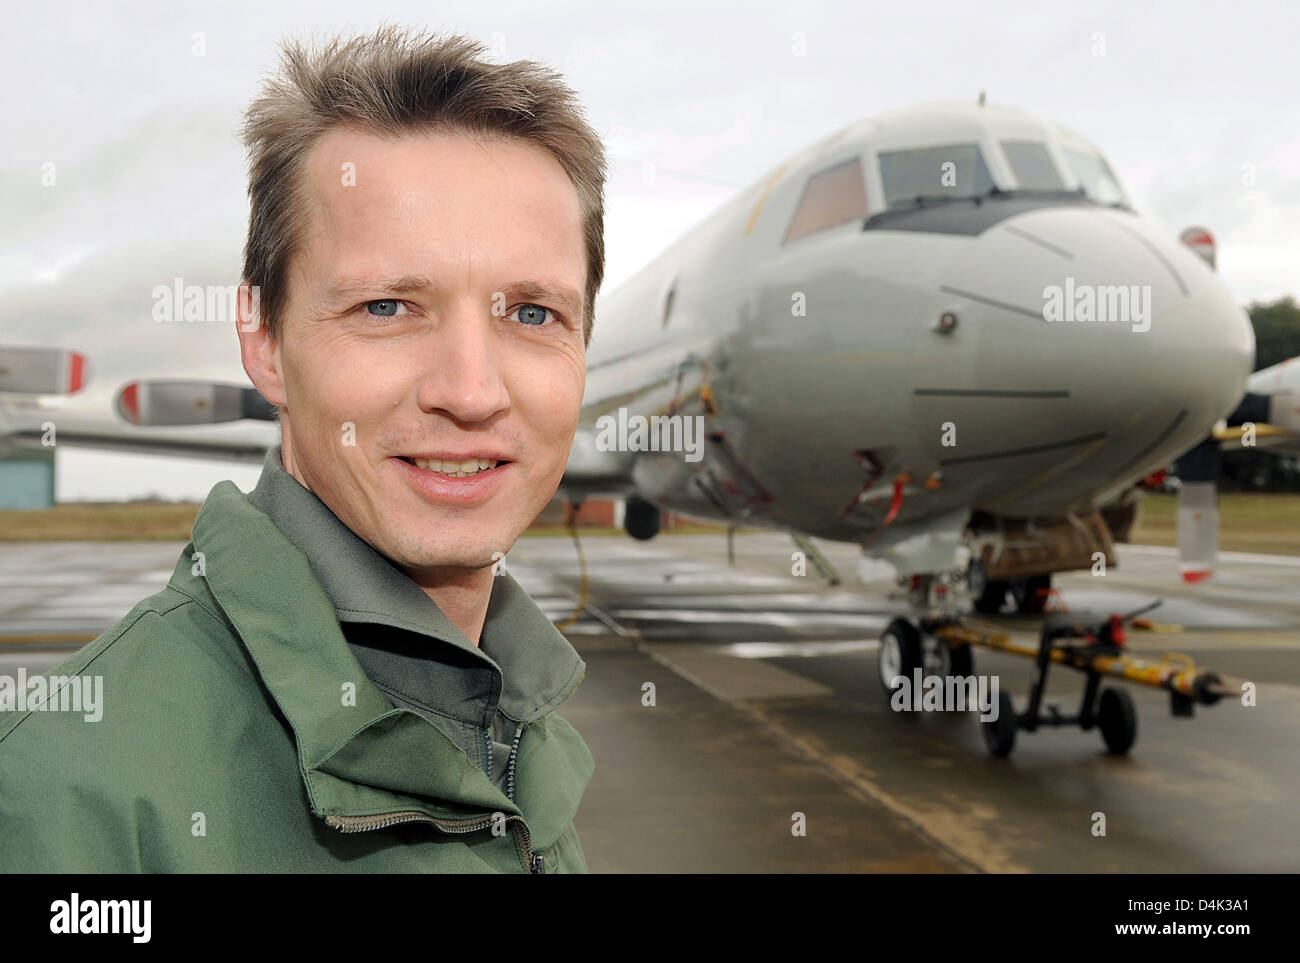 Frigate captain Mario Kaiser introduces himself as new commander of the German soldiers in Djibouti at the Horn of Africa while posing at the German navy air base MFG 3 in Nordholz, Germany, 26 March 2009. The Maritime Patrol Aircraft of type P-3C Orion (background) will replace the German frigate ?Mecklenburg-Vorpommern? as of April in fighting international terrorism within the s Stock Photo